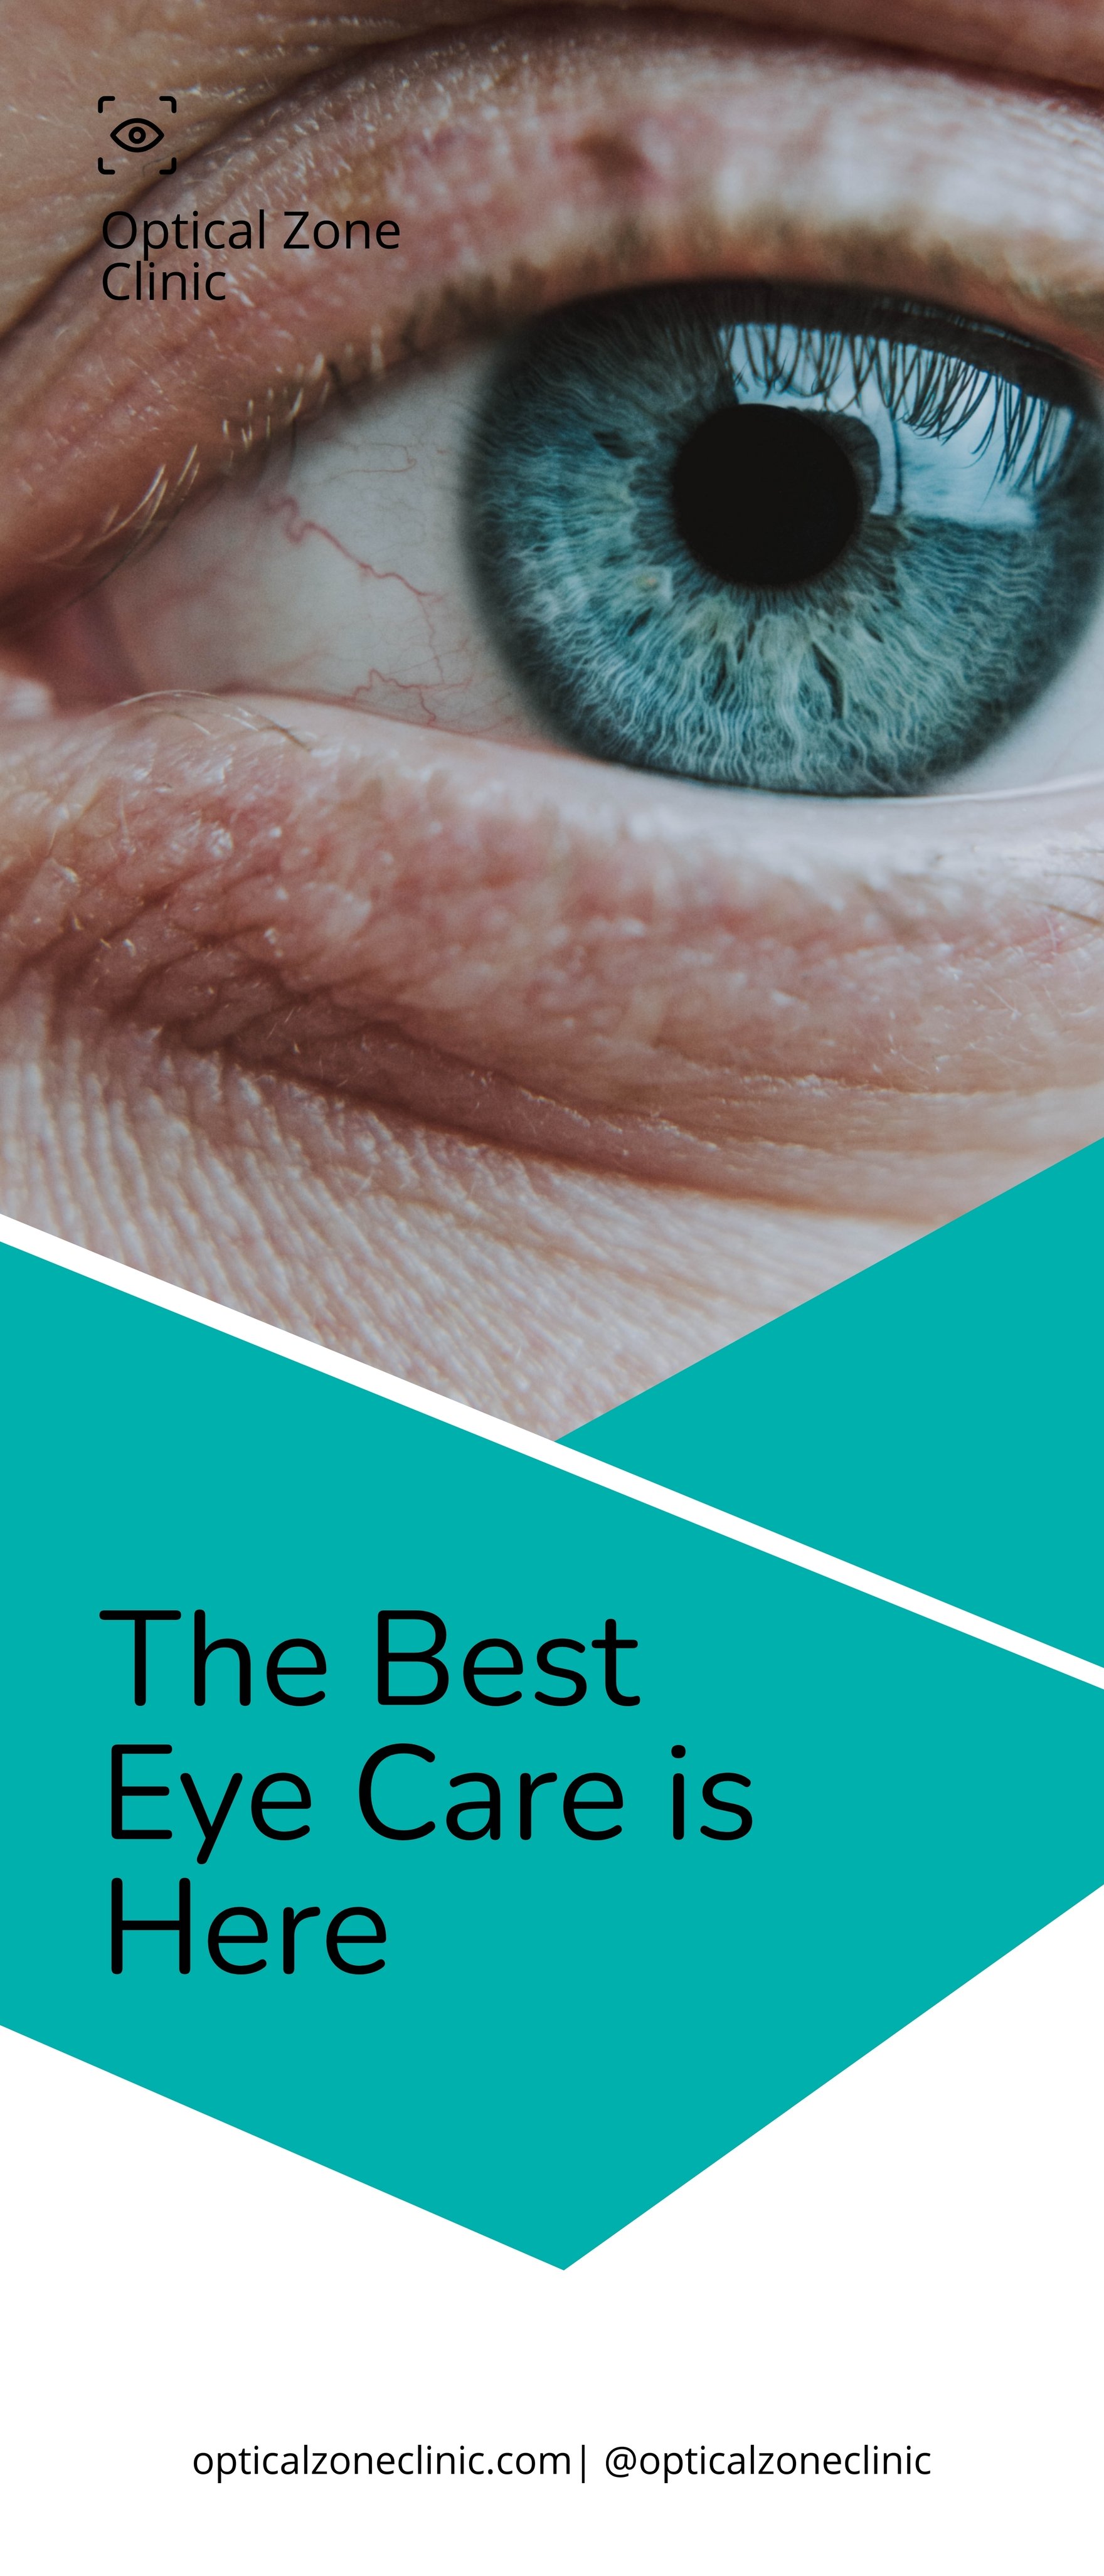 Eye Clinic Roll Up Banner Template